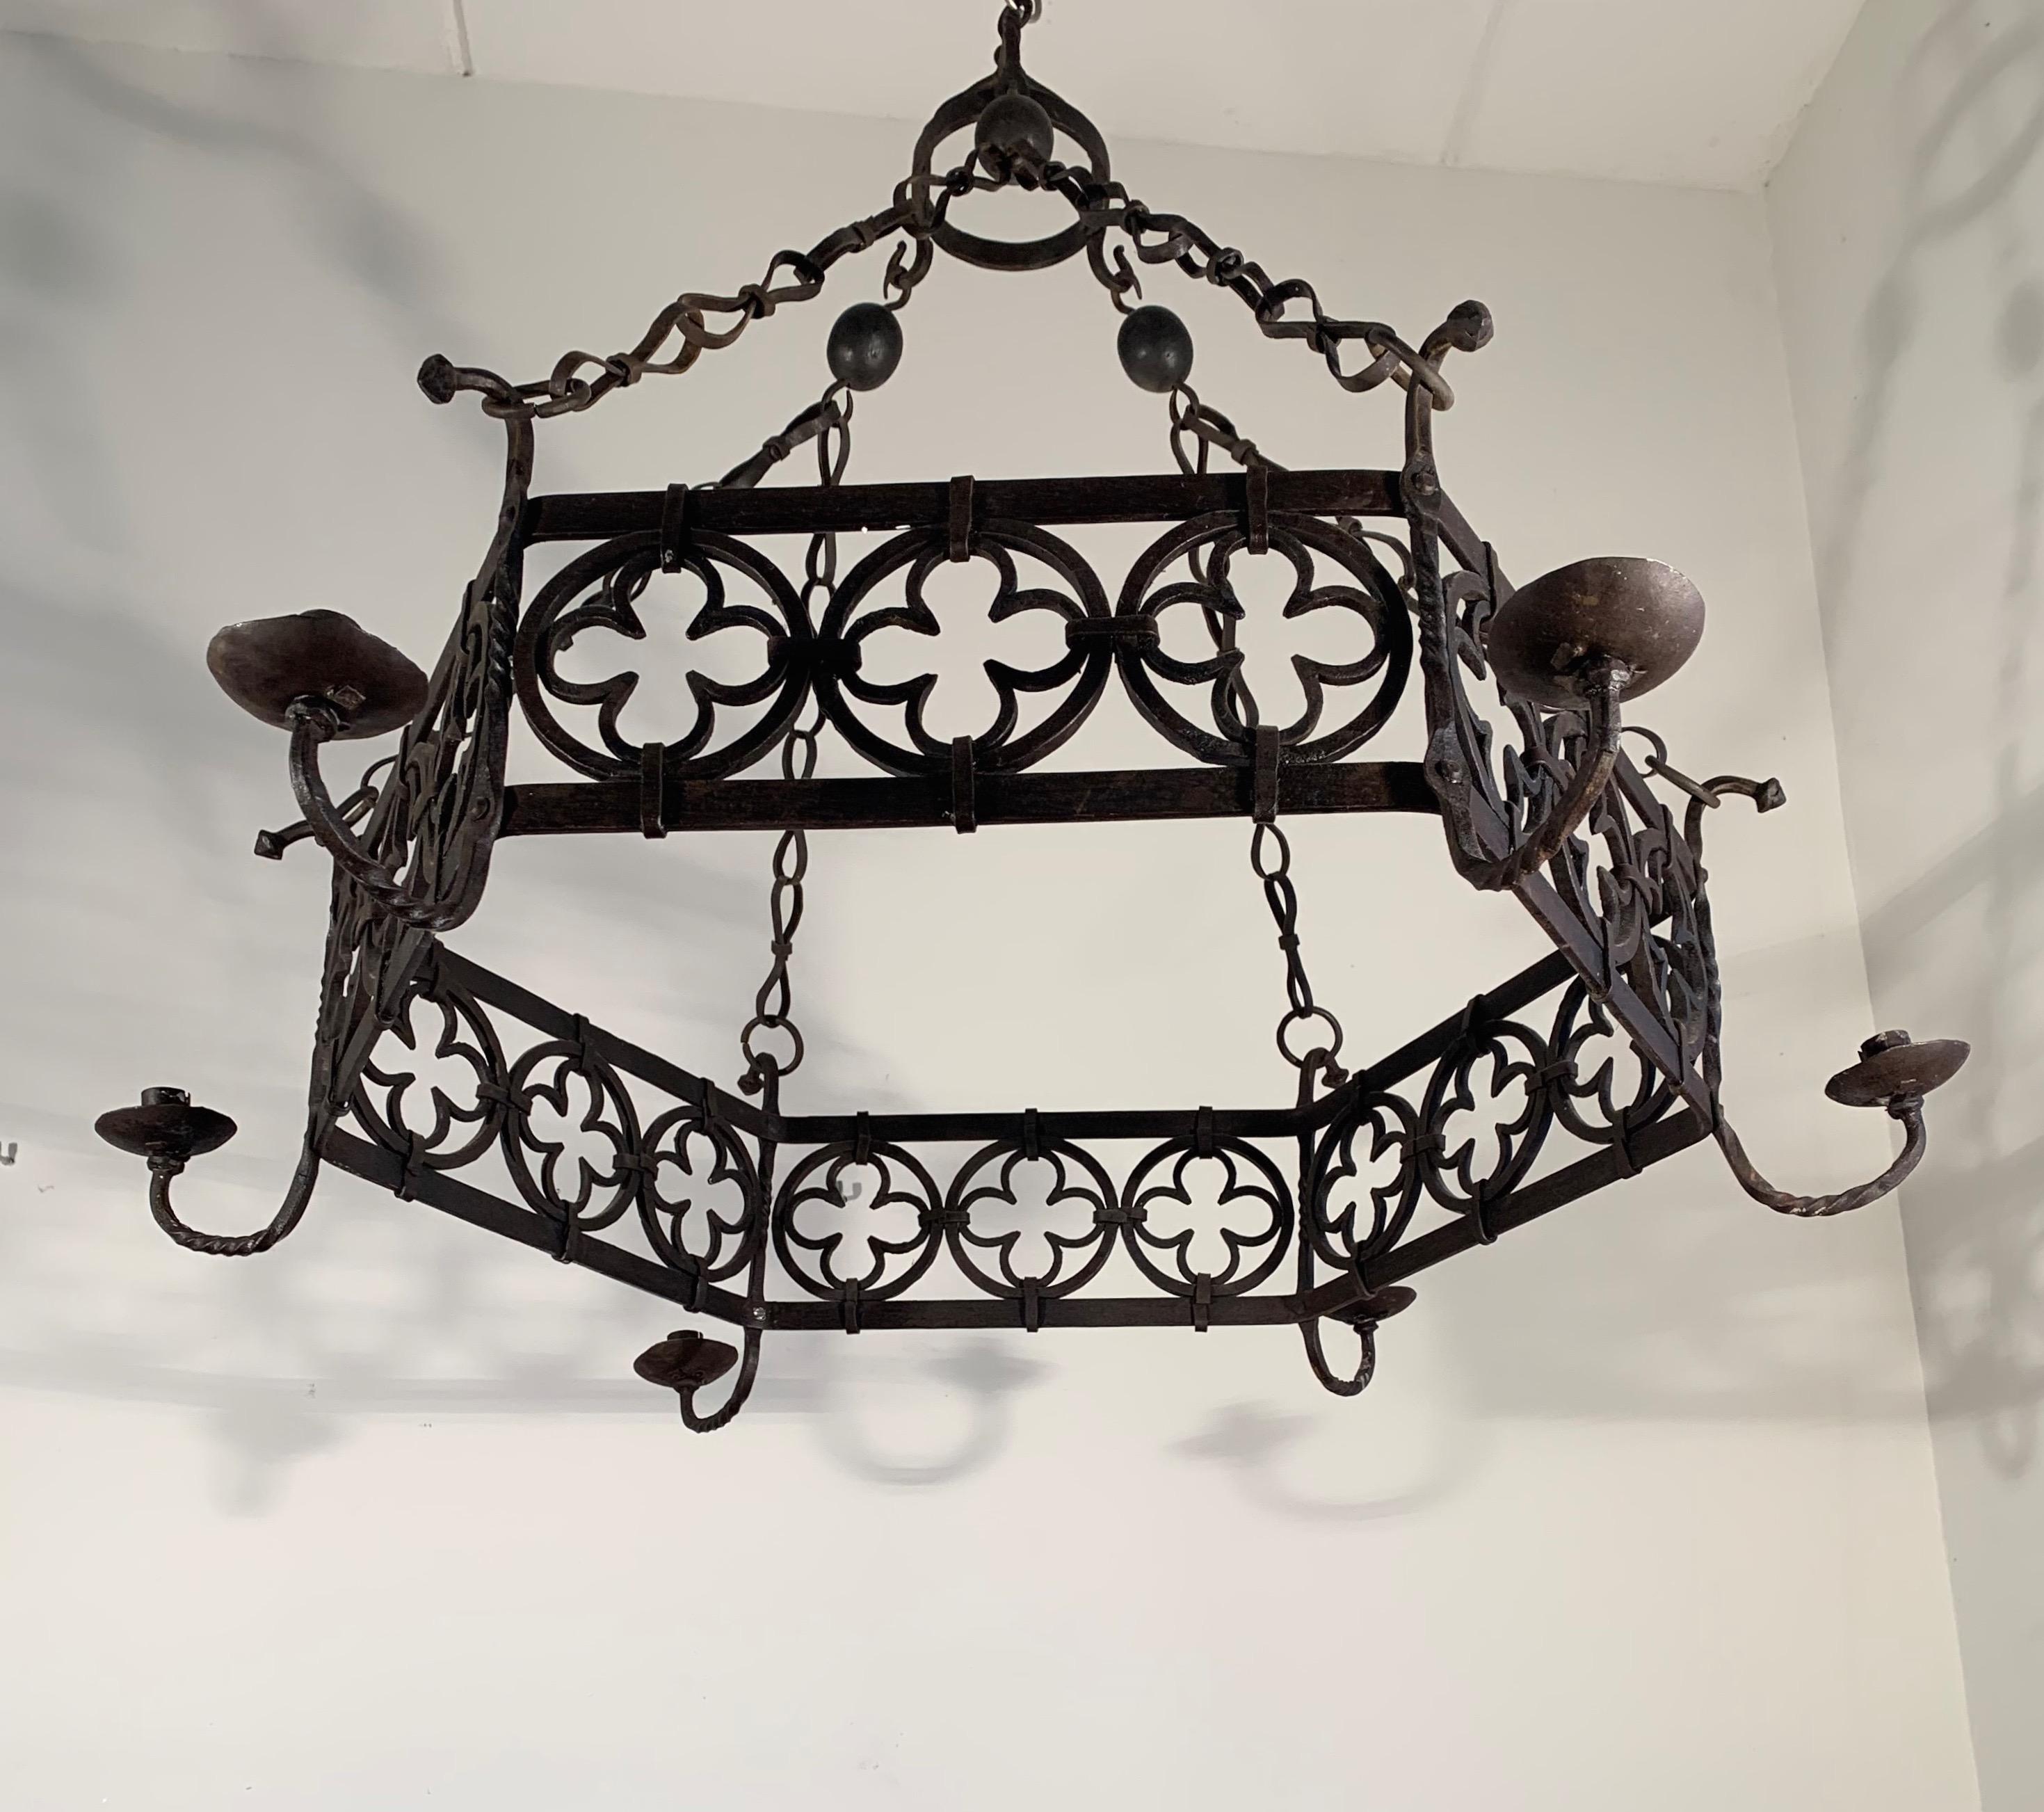 Large Gothic Revival Wrought Iron Chandelier for Dining Room / Restaurant Etc In Good Condition For Sale In Lisse, NL